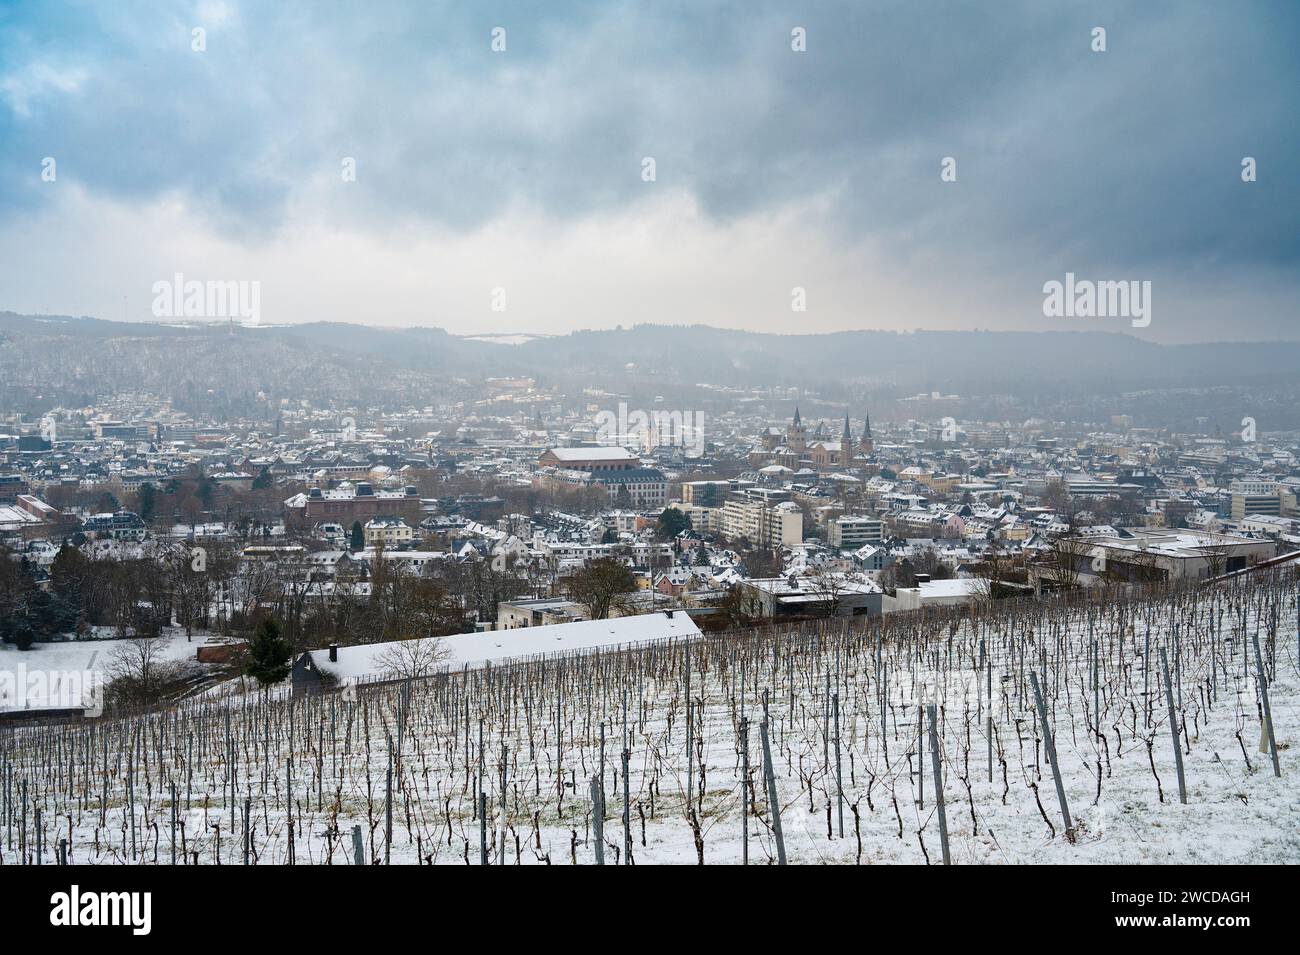 Vineyard with view of the ancient roman city of Trier covered in snow, Moselle Valley in Germany, winter landscape in rhineland palatine Stock Photo